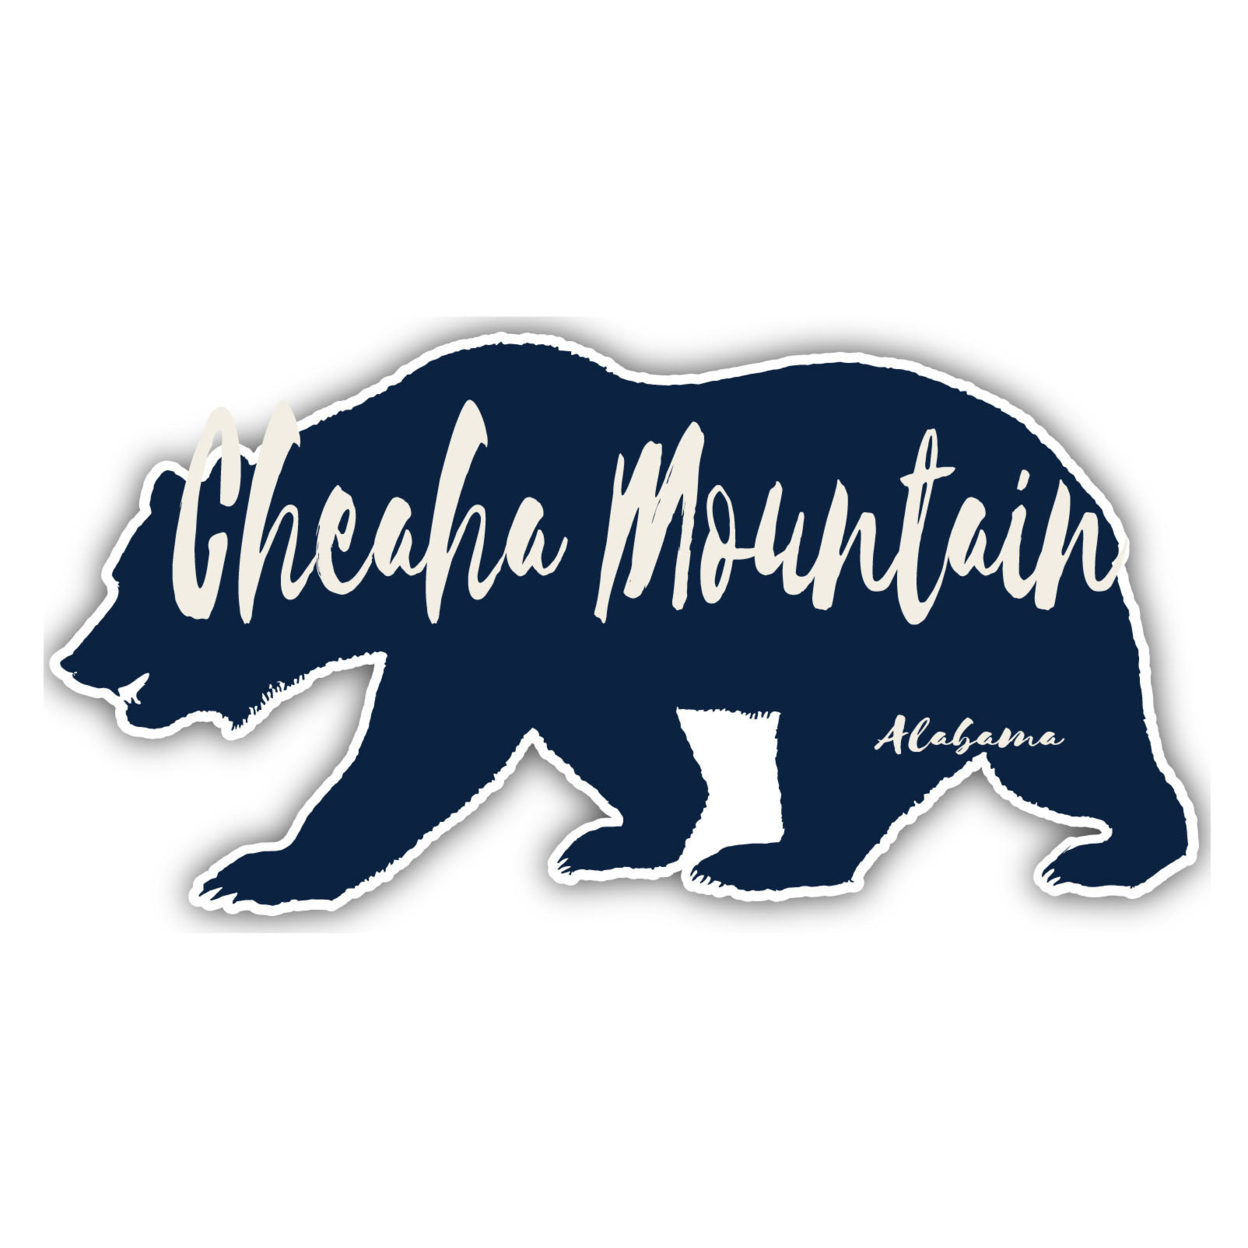 Cheaha Mountain Alabama Souvenir Decorative Stickers (Choose Theme And Size) - 4-Pack, 4-Inch, Bear